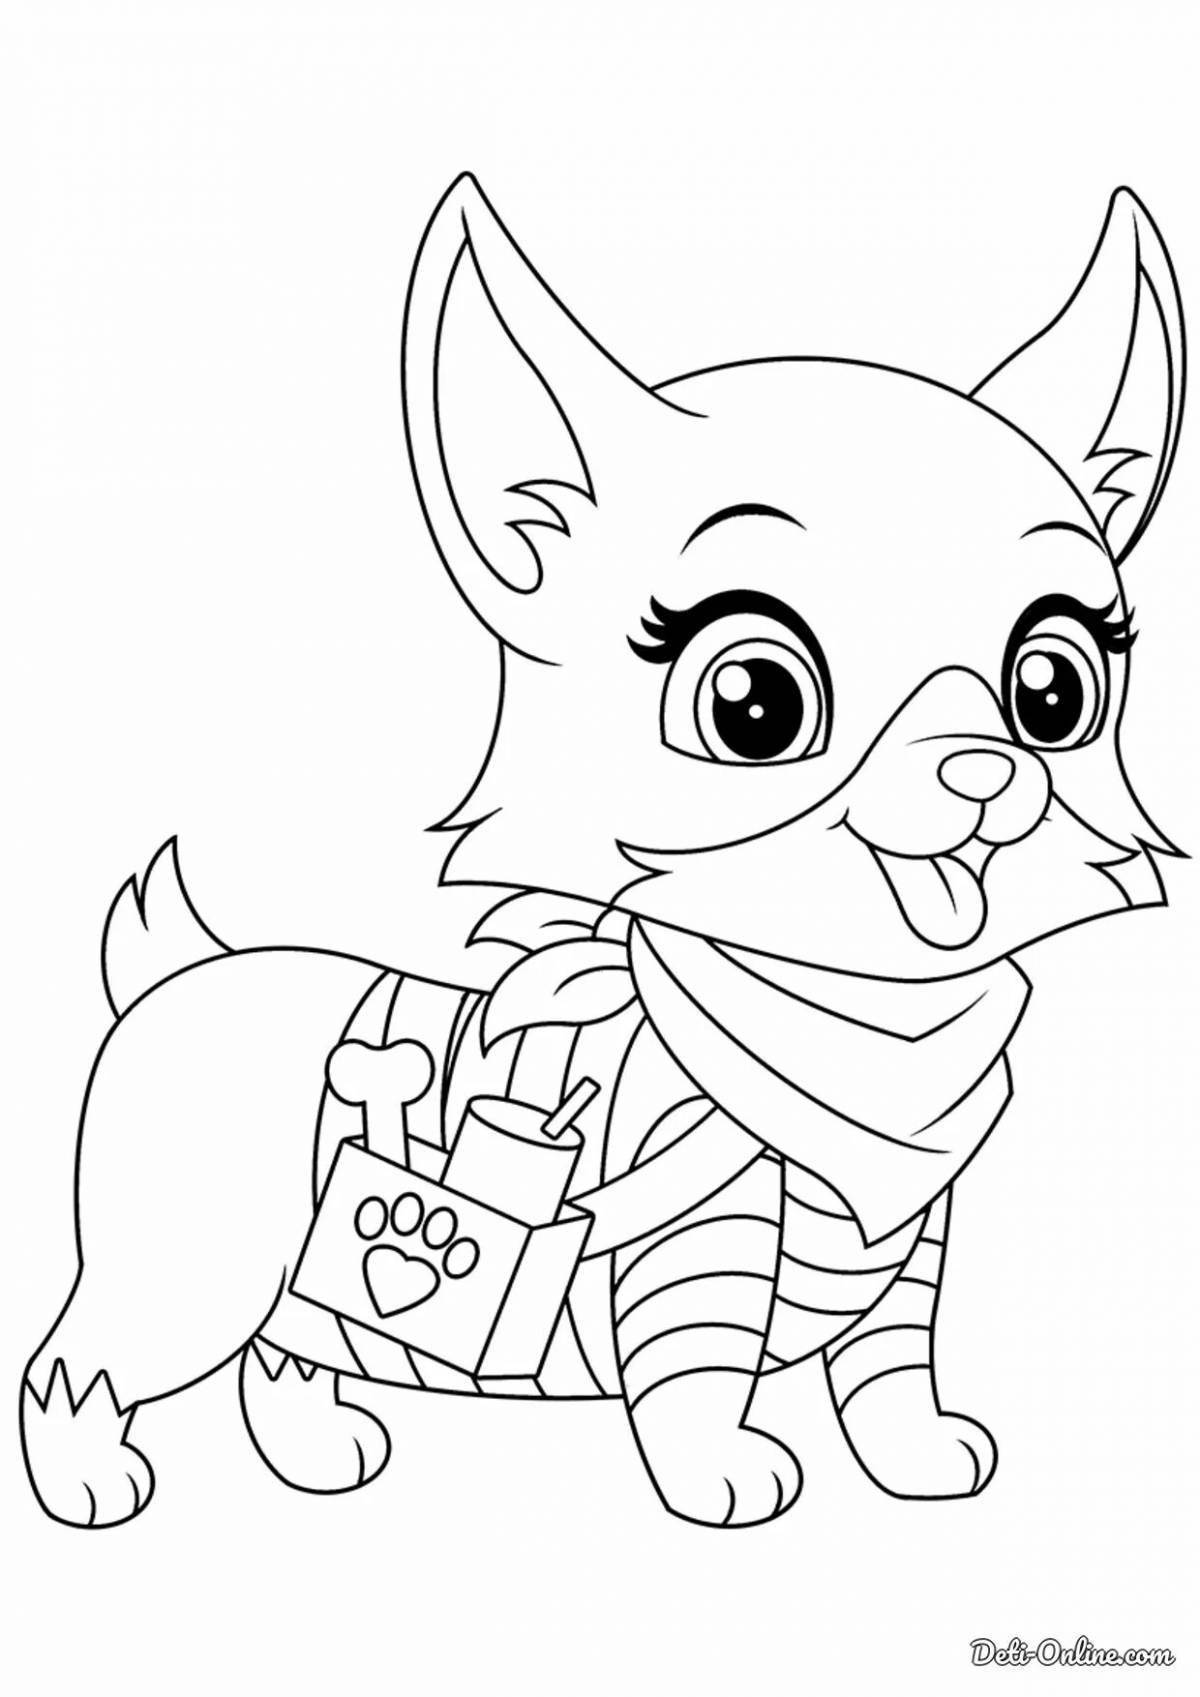 Playtime coloring book for girls, cats and dogs